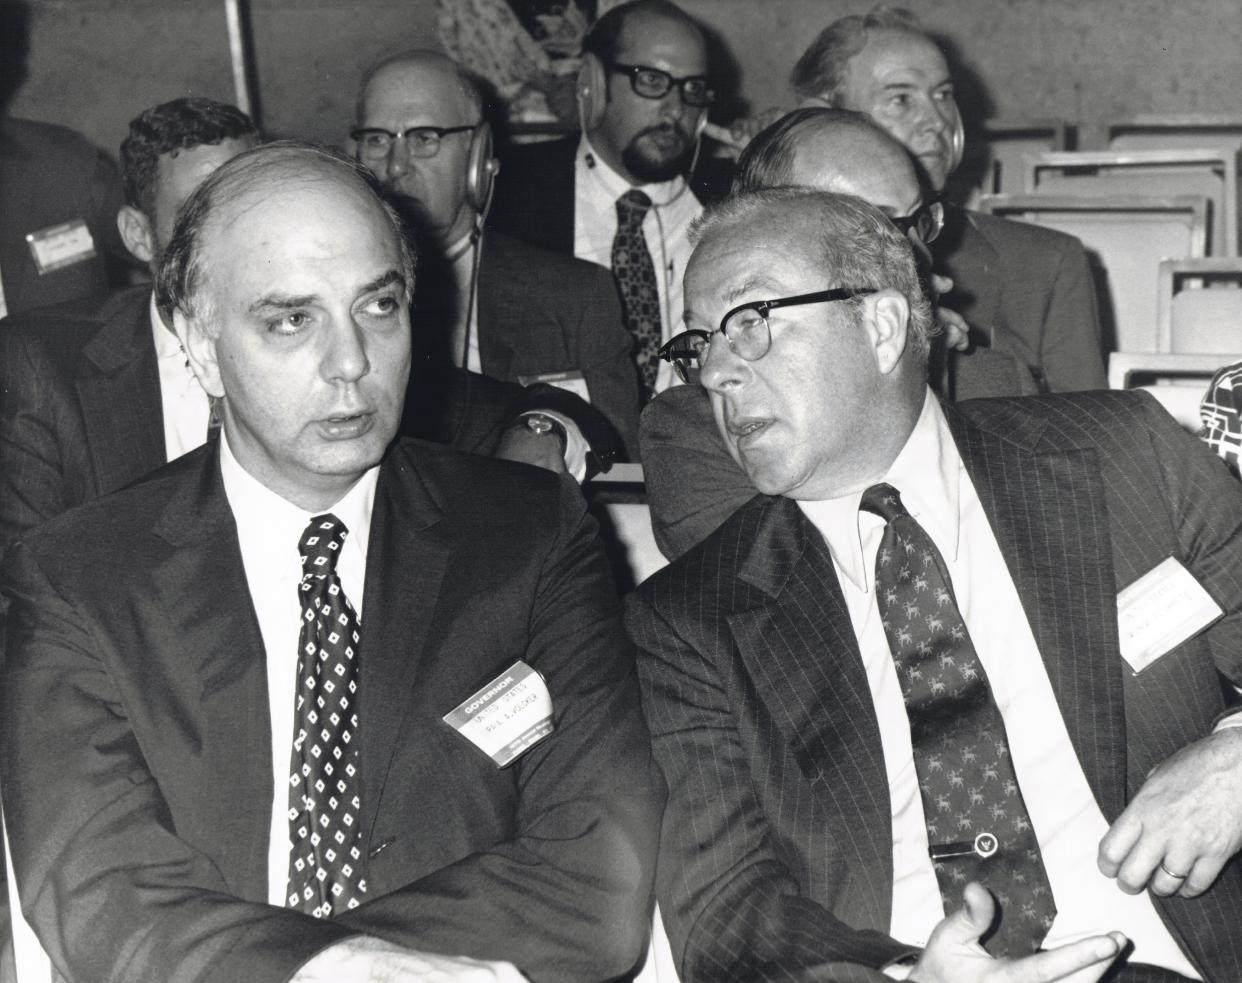 American economist and Under Secretary of the Treasury for International Affairs Paul Volcker (1927 - 2019) (left) and politician and US Secretary of the Treasury George P Shultz talk during the annual International Monetary Fund (IMF) meeting, Washington DC, September 26, 1972. (Photo by Benjamin E. 'Gene' Forte/CNP/Getty Images)